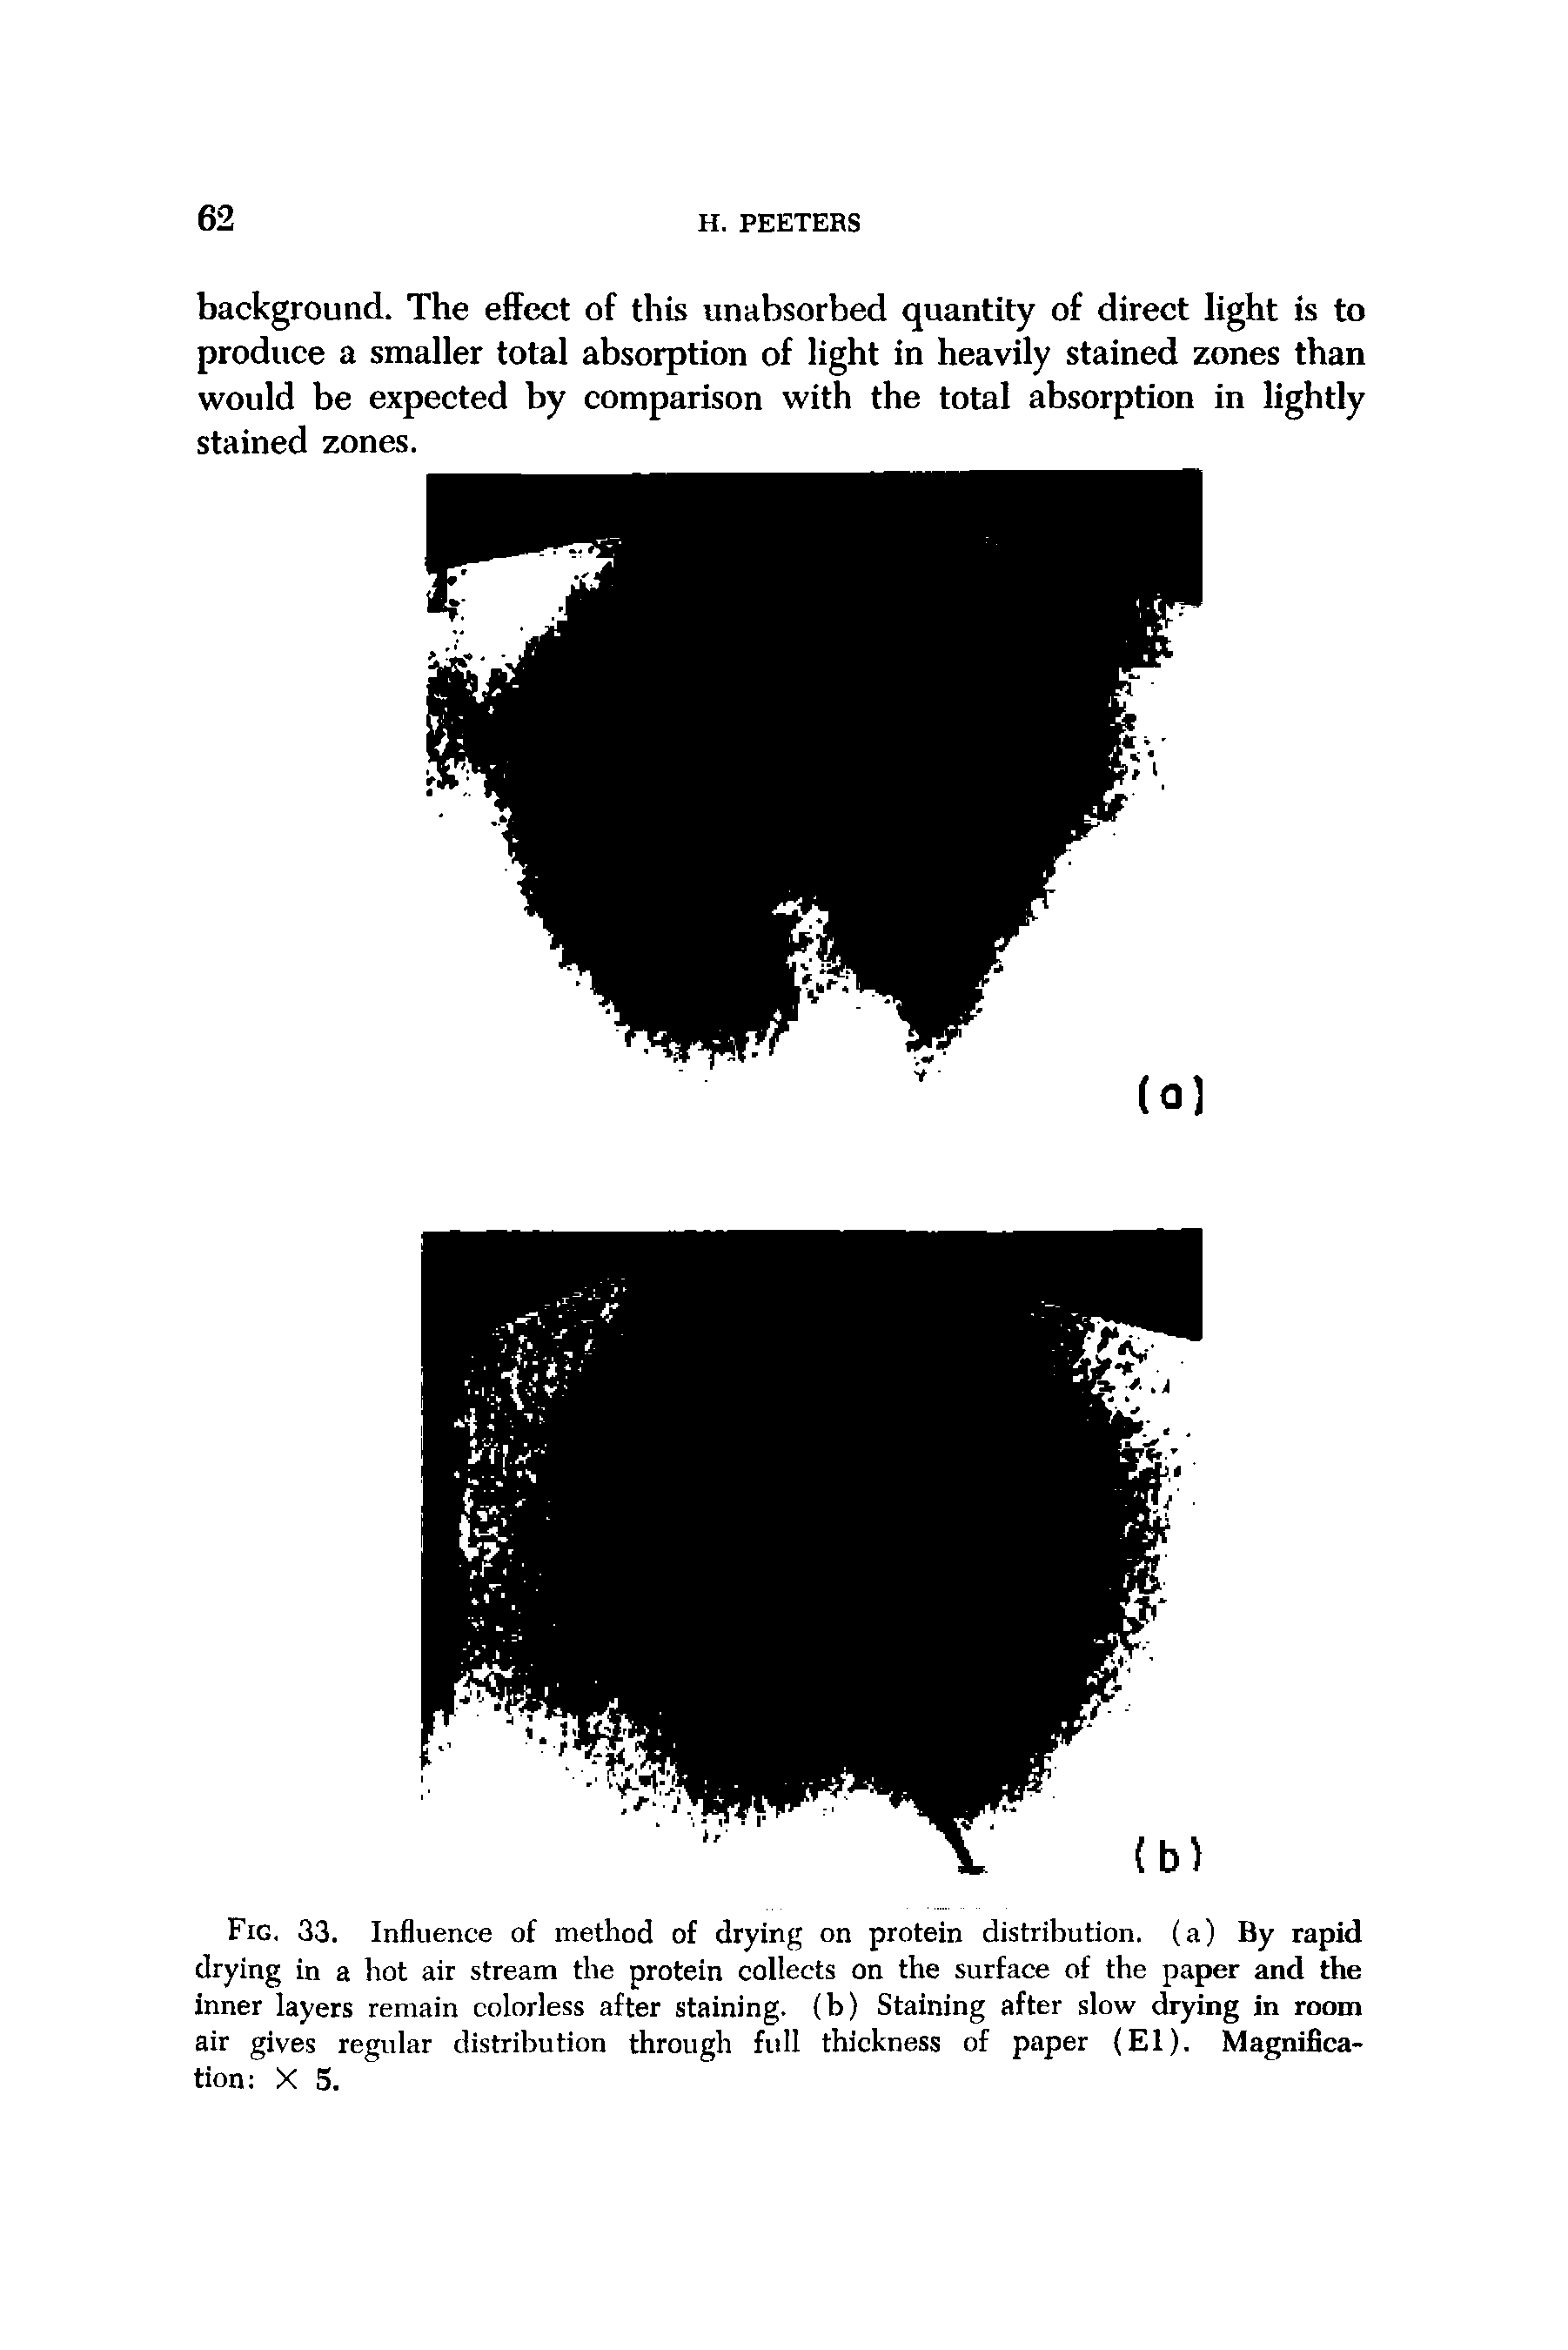 Fig. 33. Influence of method of drying on protein distribution, (a) By rapid drying in a hot air stream the protein collects on the surface of the paper and the inner layers remain colorless after staining, (b) Staining after slow drying in room air gives regular distribution through full thickness of paper (El). Magnification X 5.